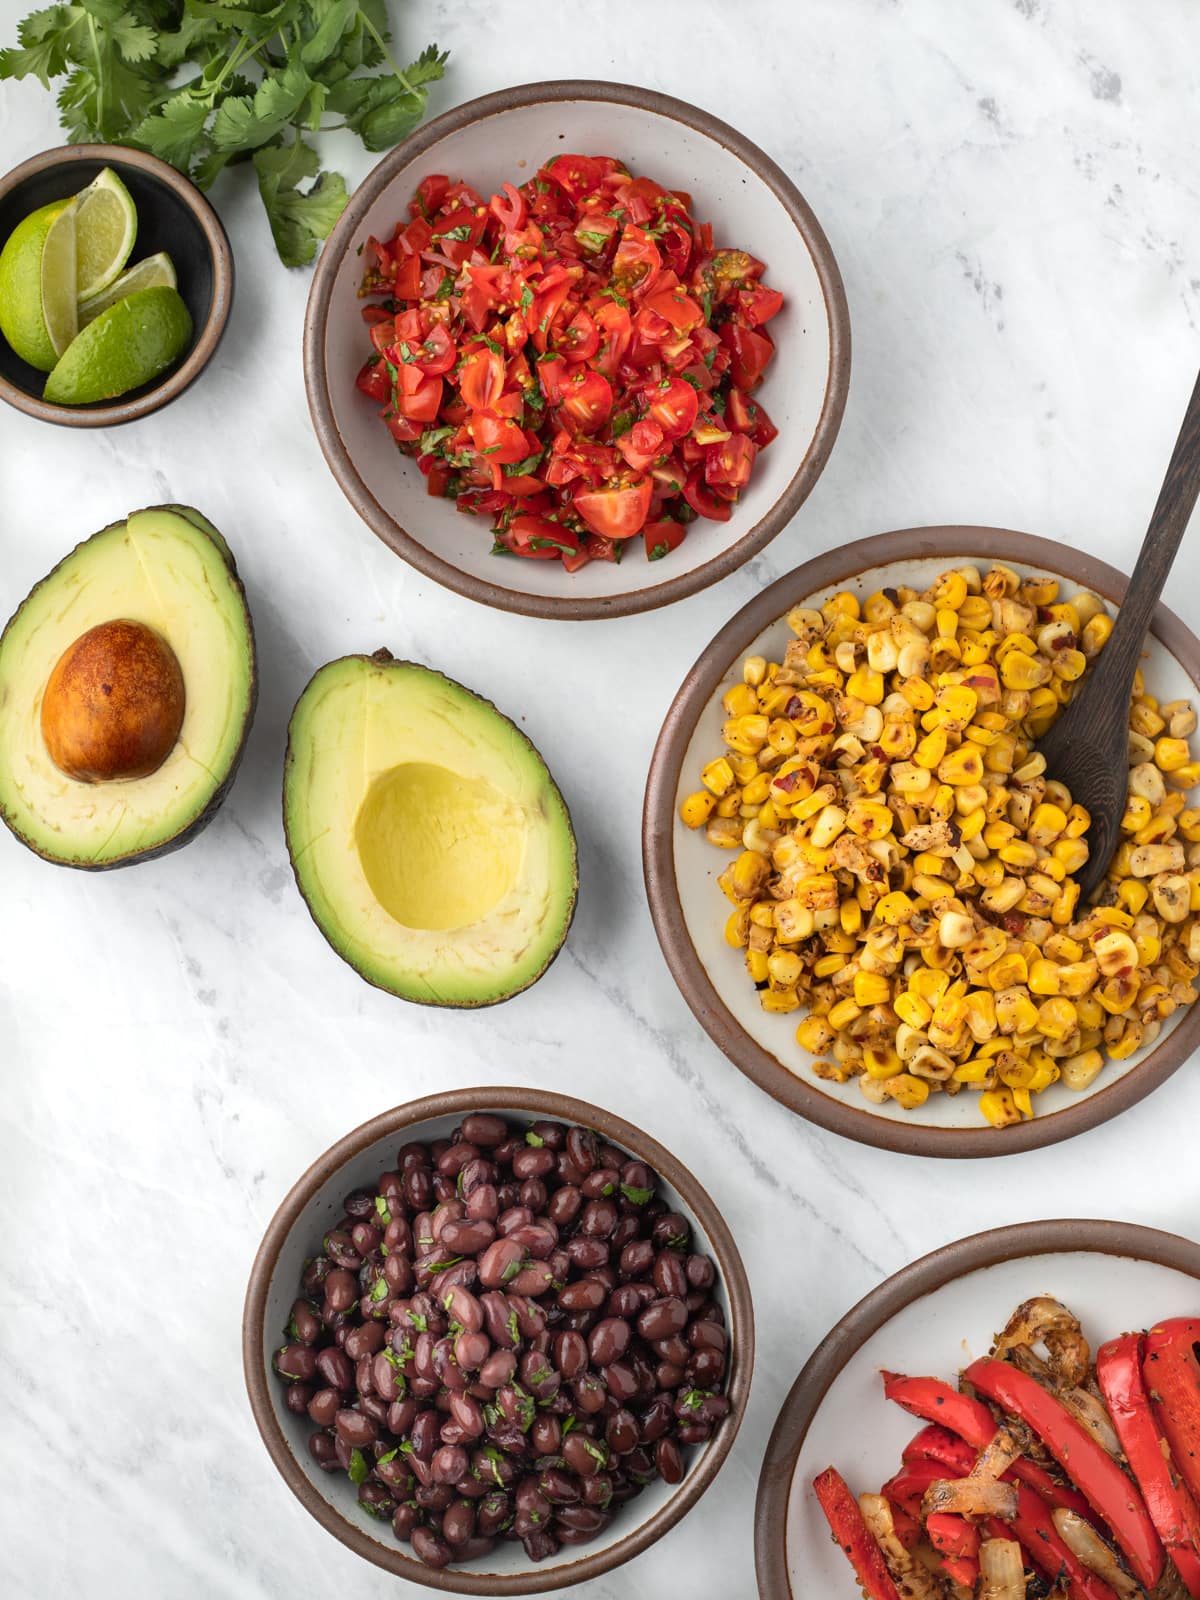 Bowls filled toppings for vegan burrito bowl: pico de gallo, spicy grilled corn, black beans, avocado halves,and fajita spiced peppers and onions.